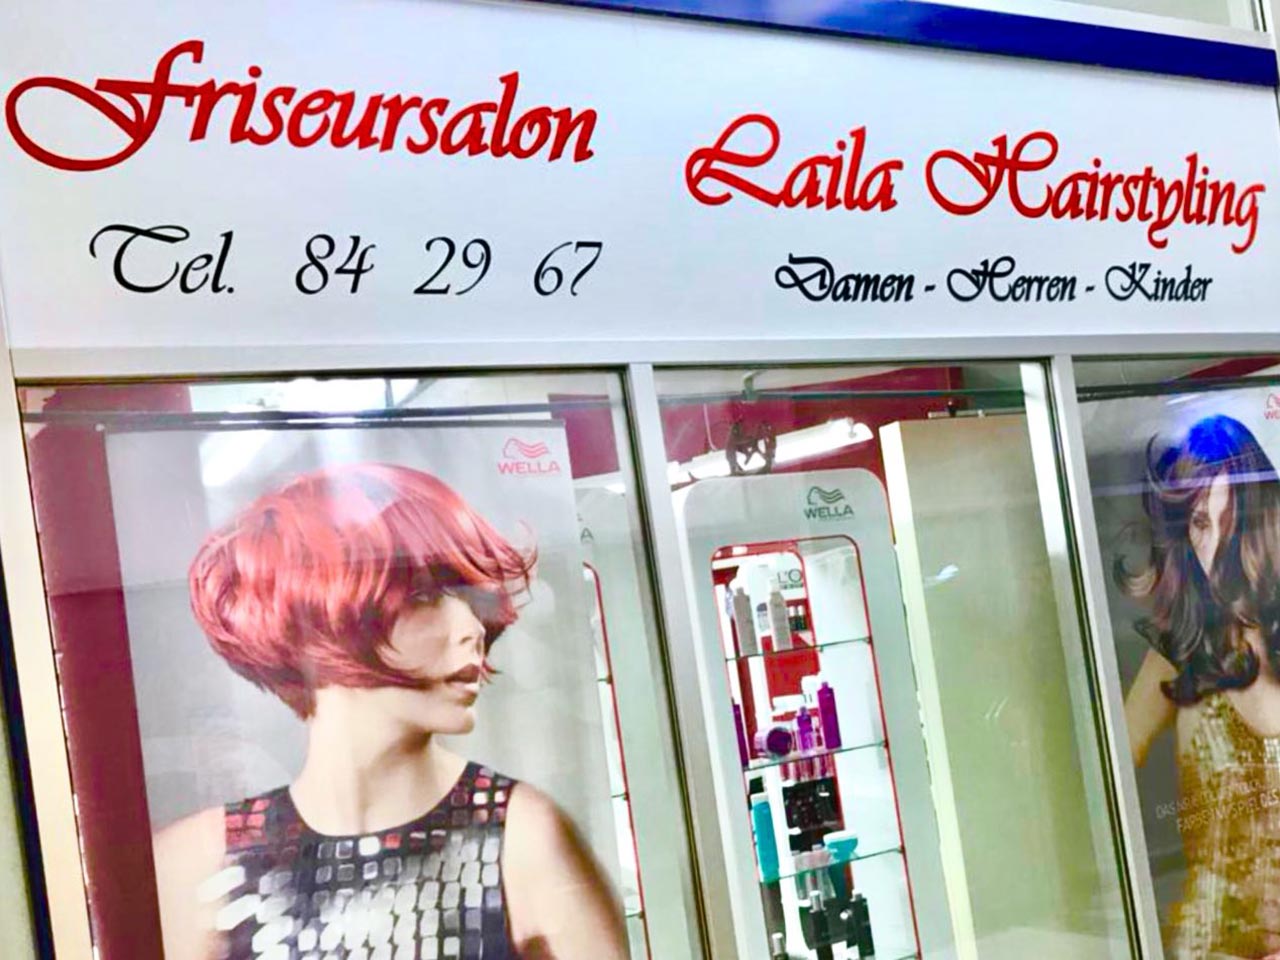 Laila Hairstyling